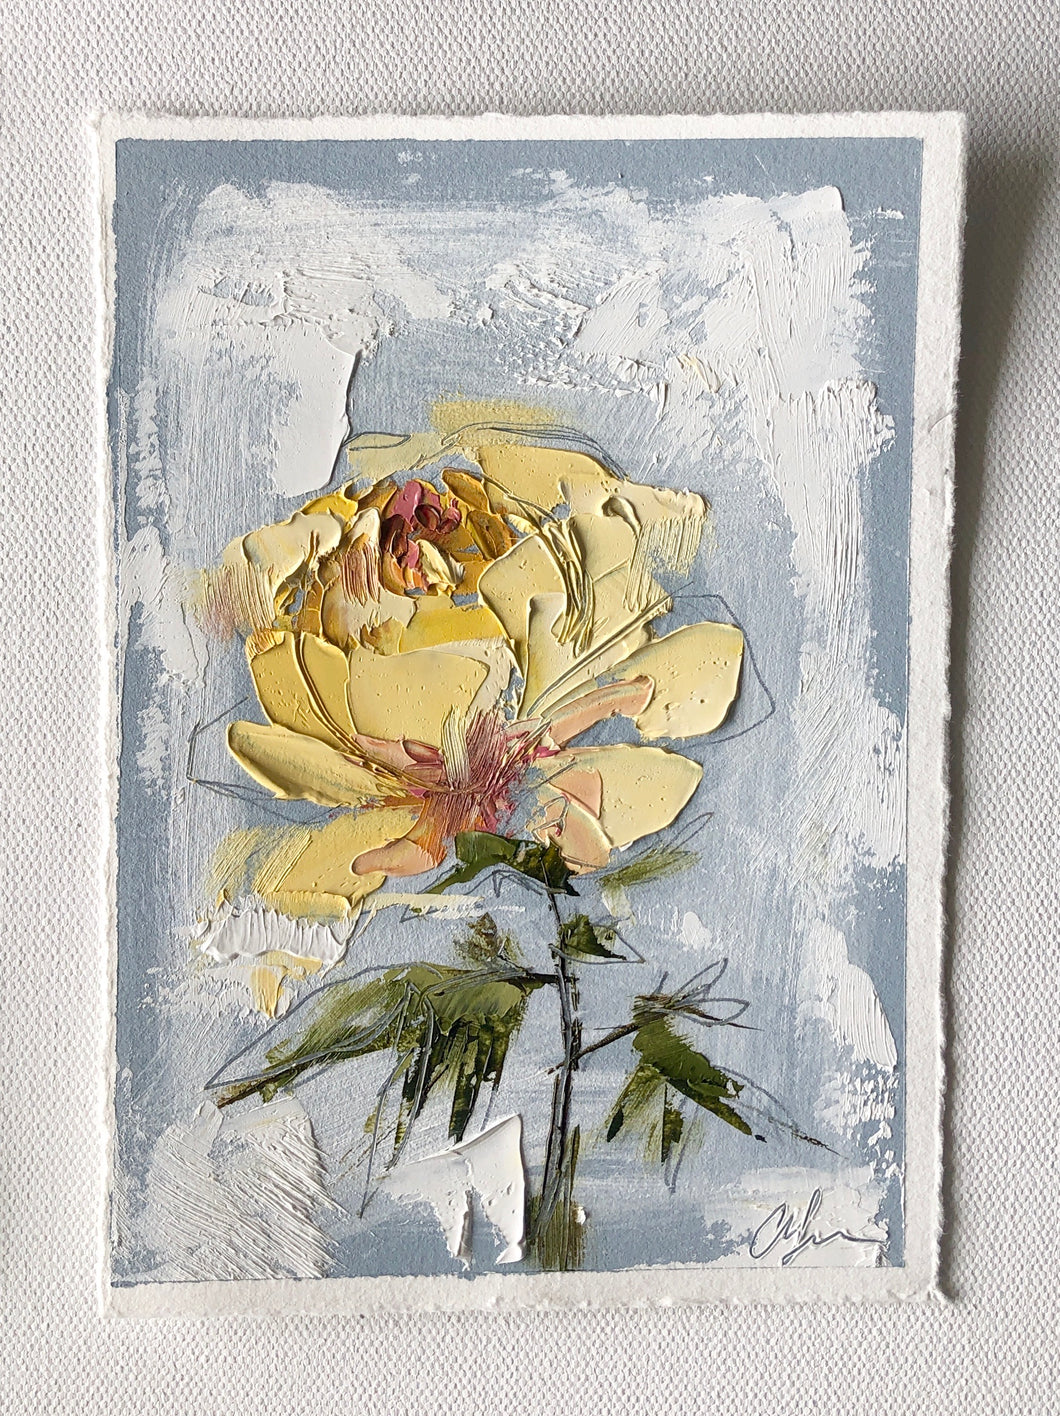 “Yellow on Blue II” 7x5” Oil/Graphite on Paper